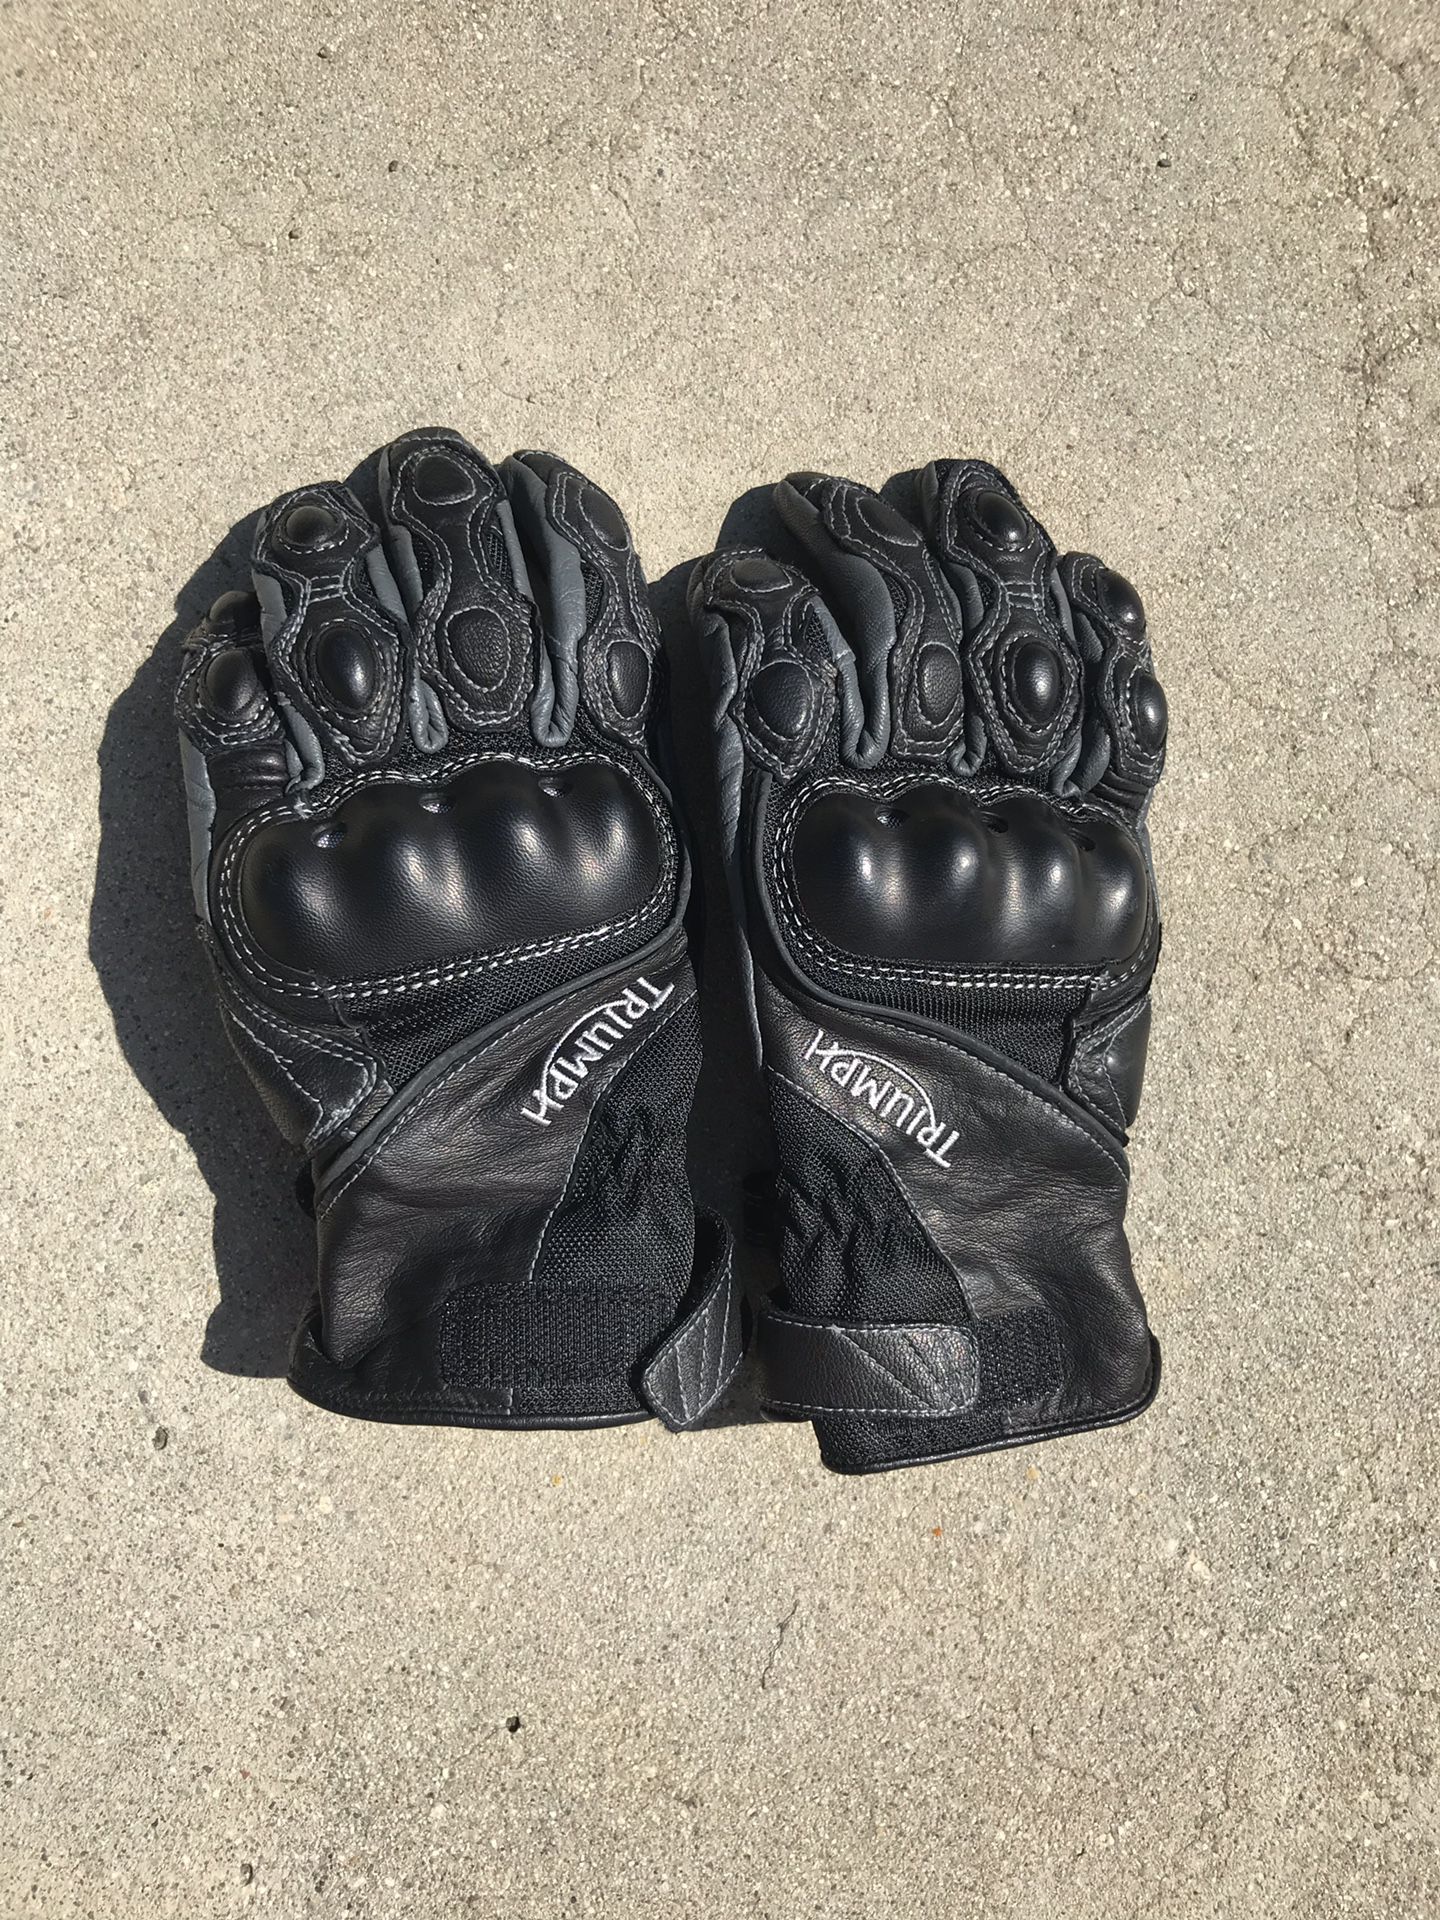 Triumph motorcycle gloves-Medium-never used